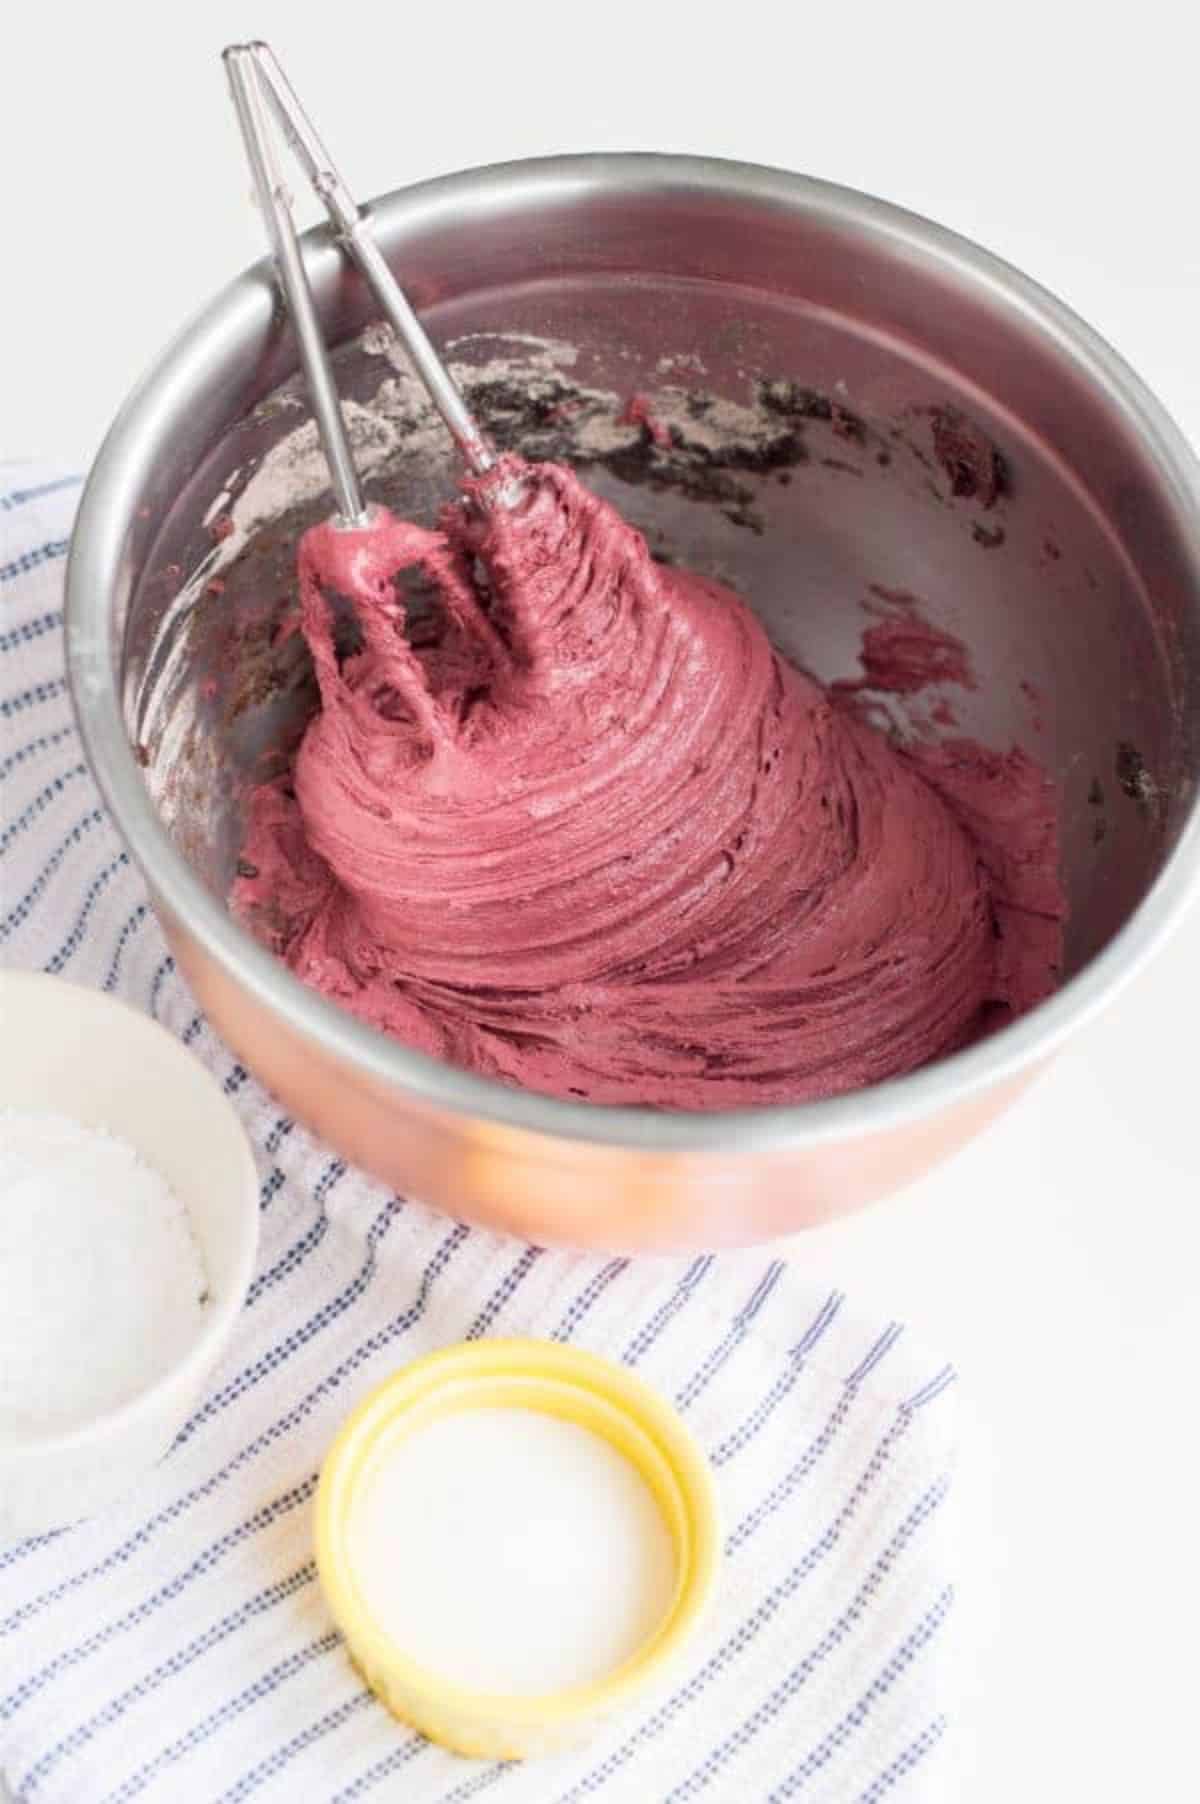 chocolate cake mix mixed with red gel food coloring in a stainless mixing bowl with beaters in it.